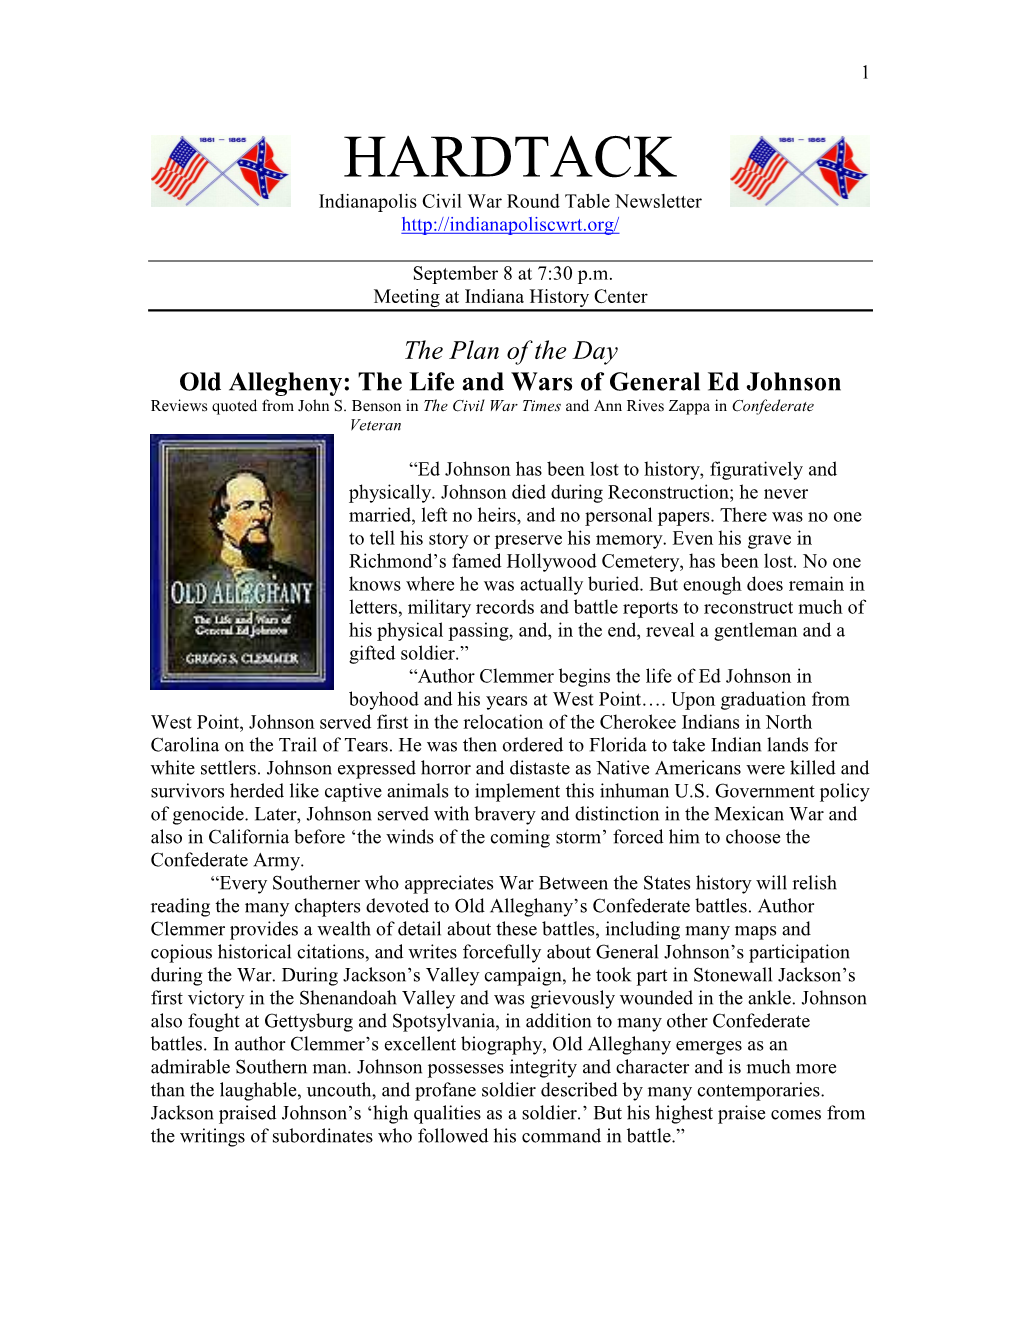 HARDTACK Indianapolis Civil War Round Table Newsletter